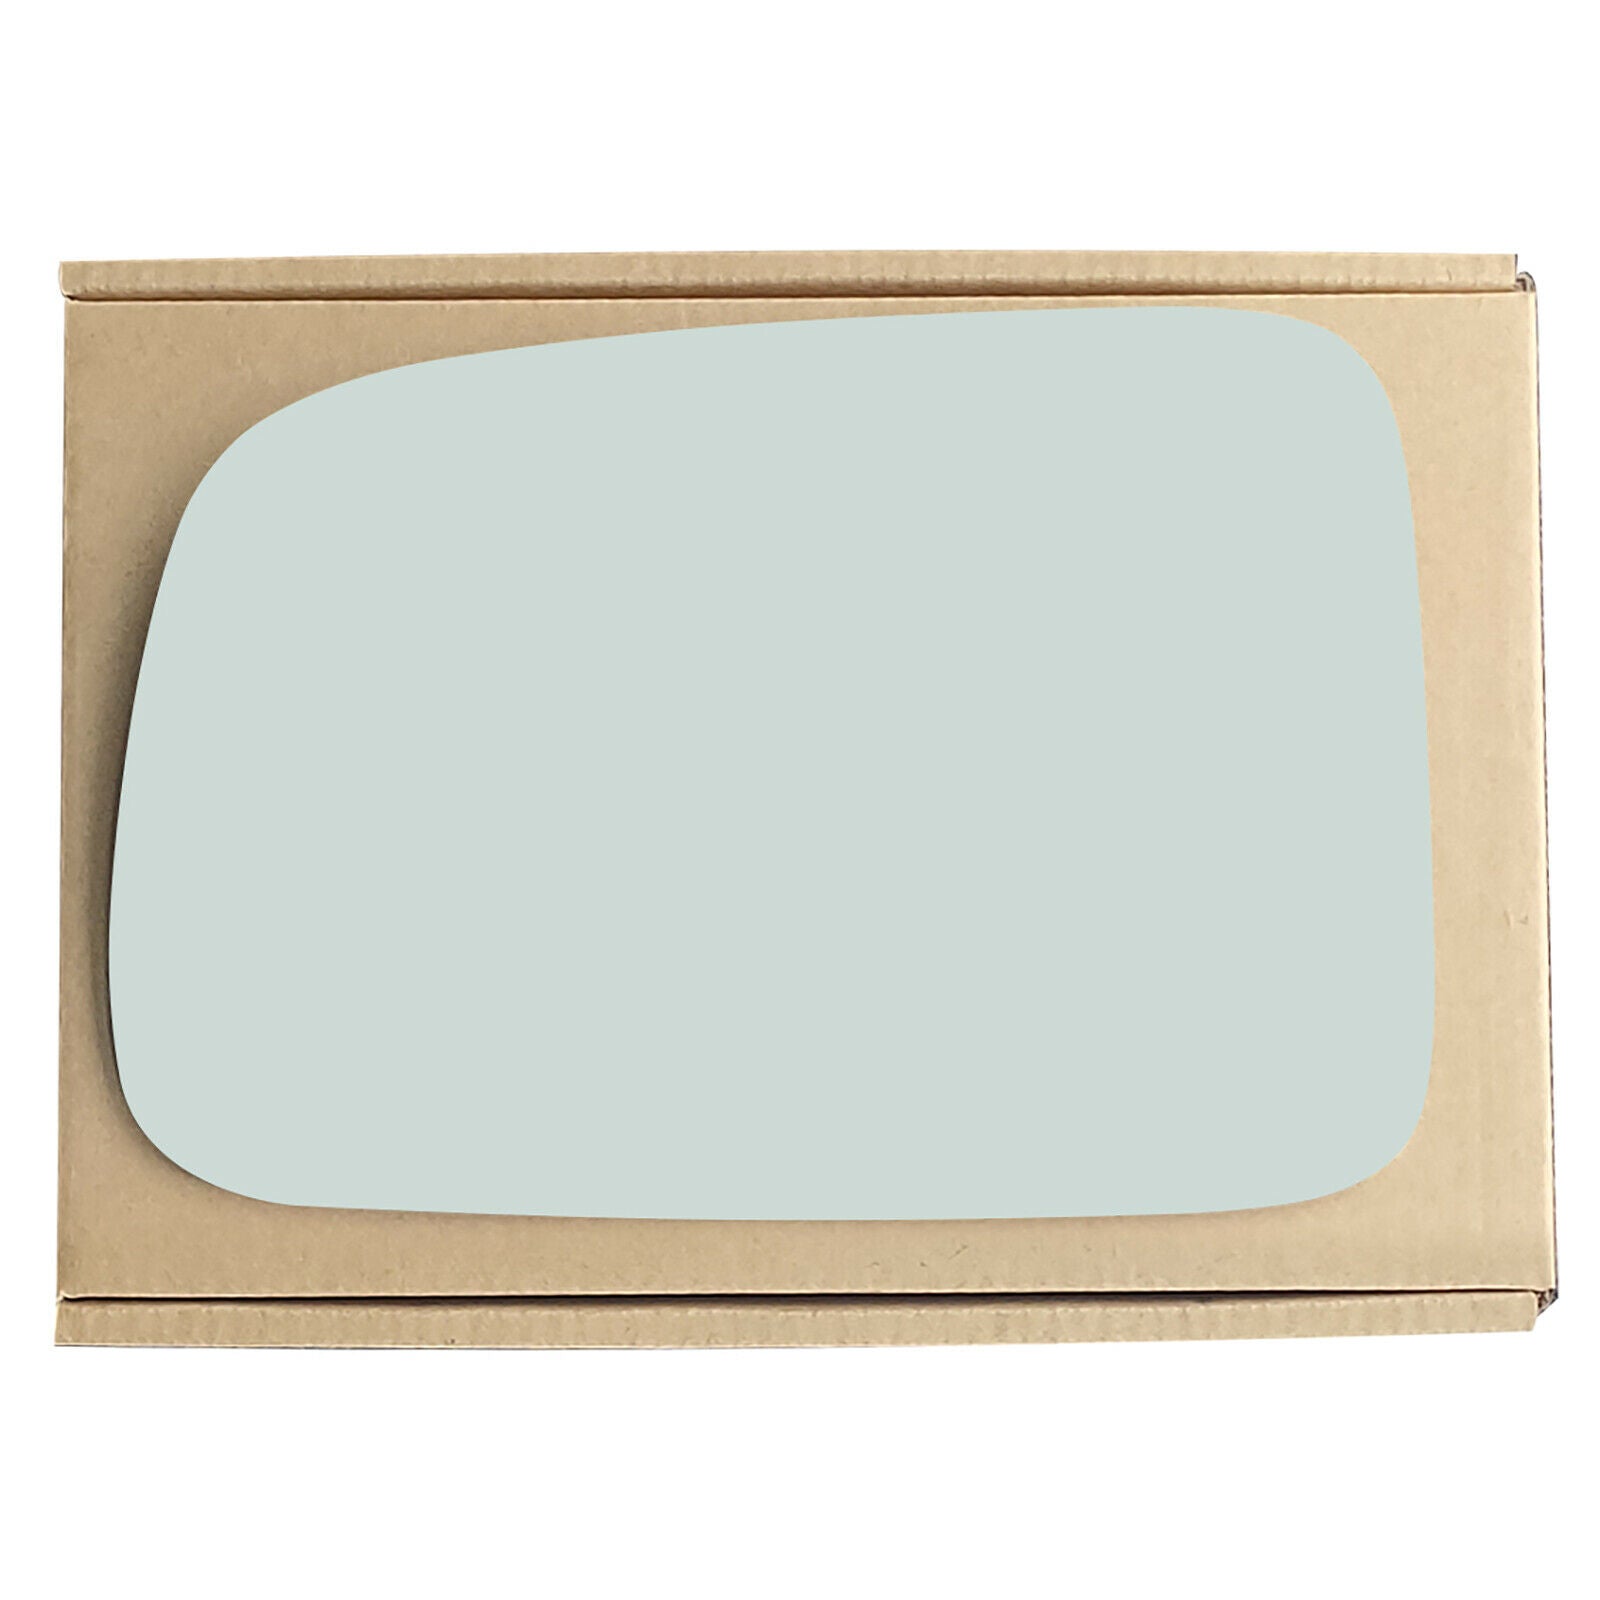 WLLW Mirror Glass Replacement for 1997-2006 Honda CR-V, Driver Left Side LH/Passenger Right Side RH/The Both Sides Flat Convex M-0029